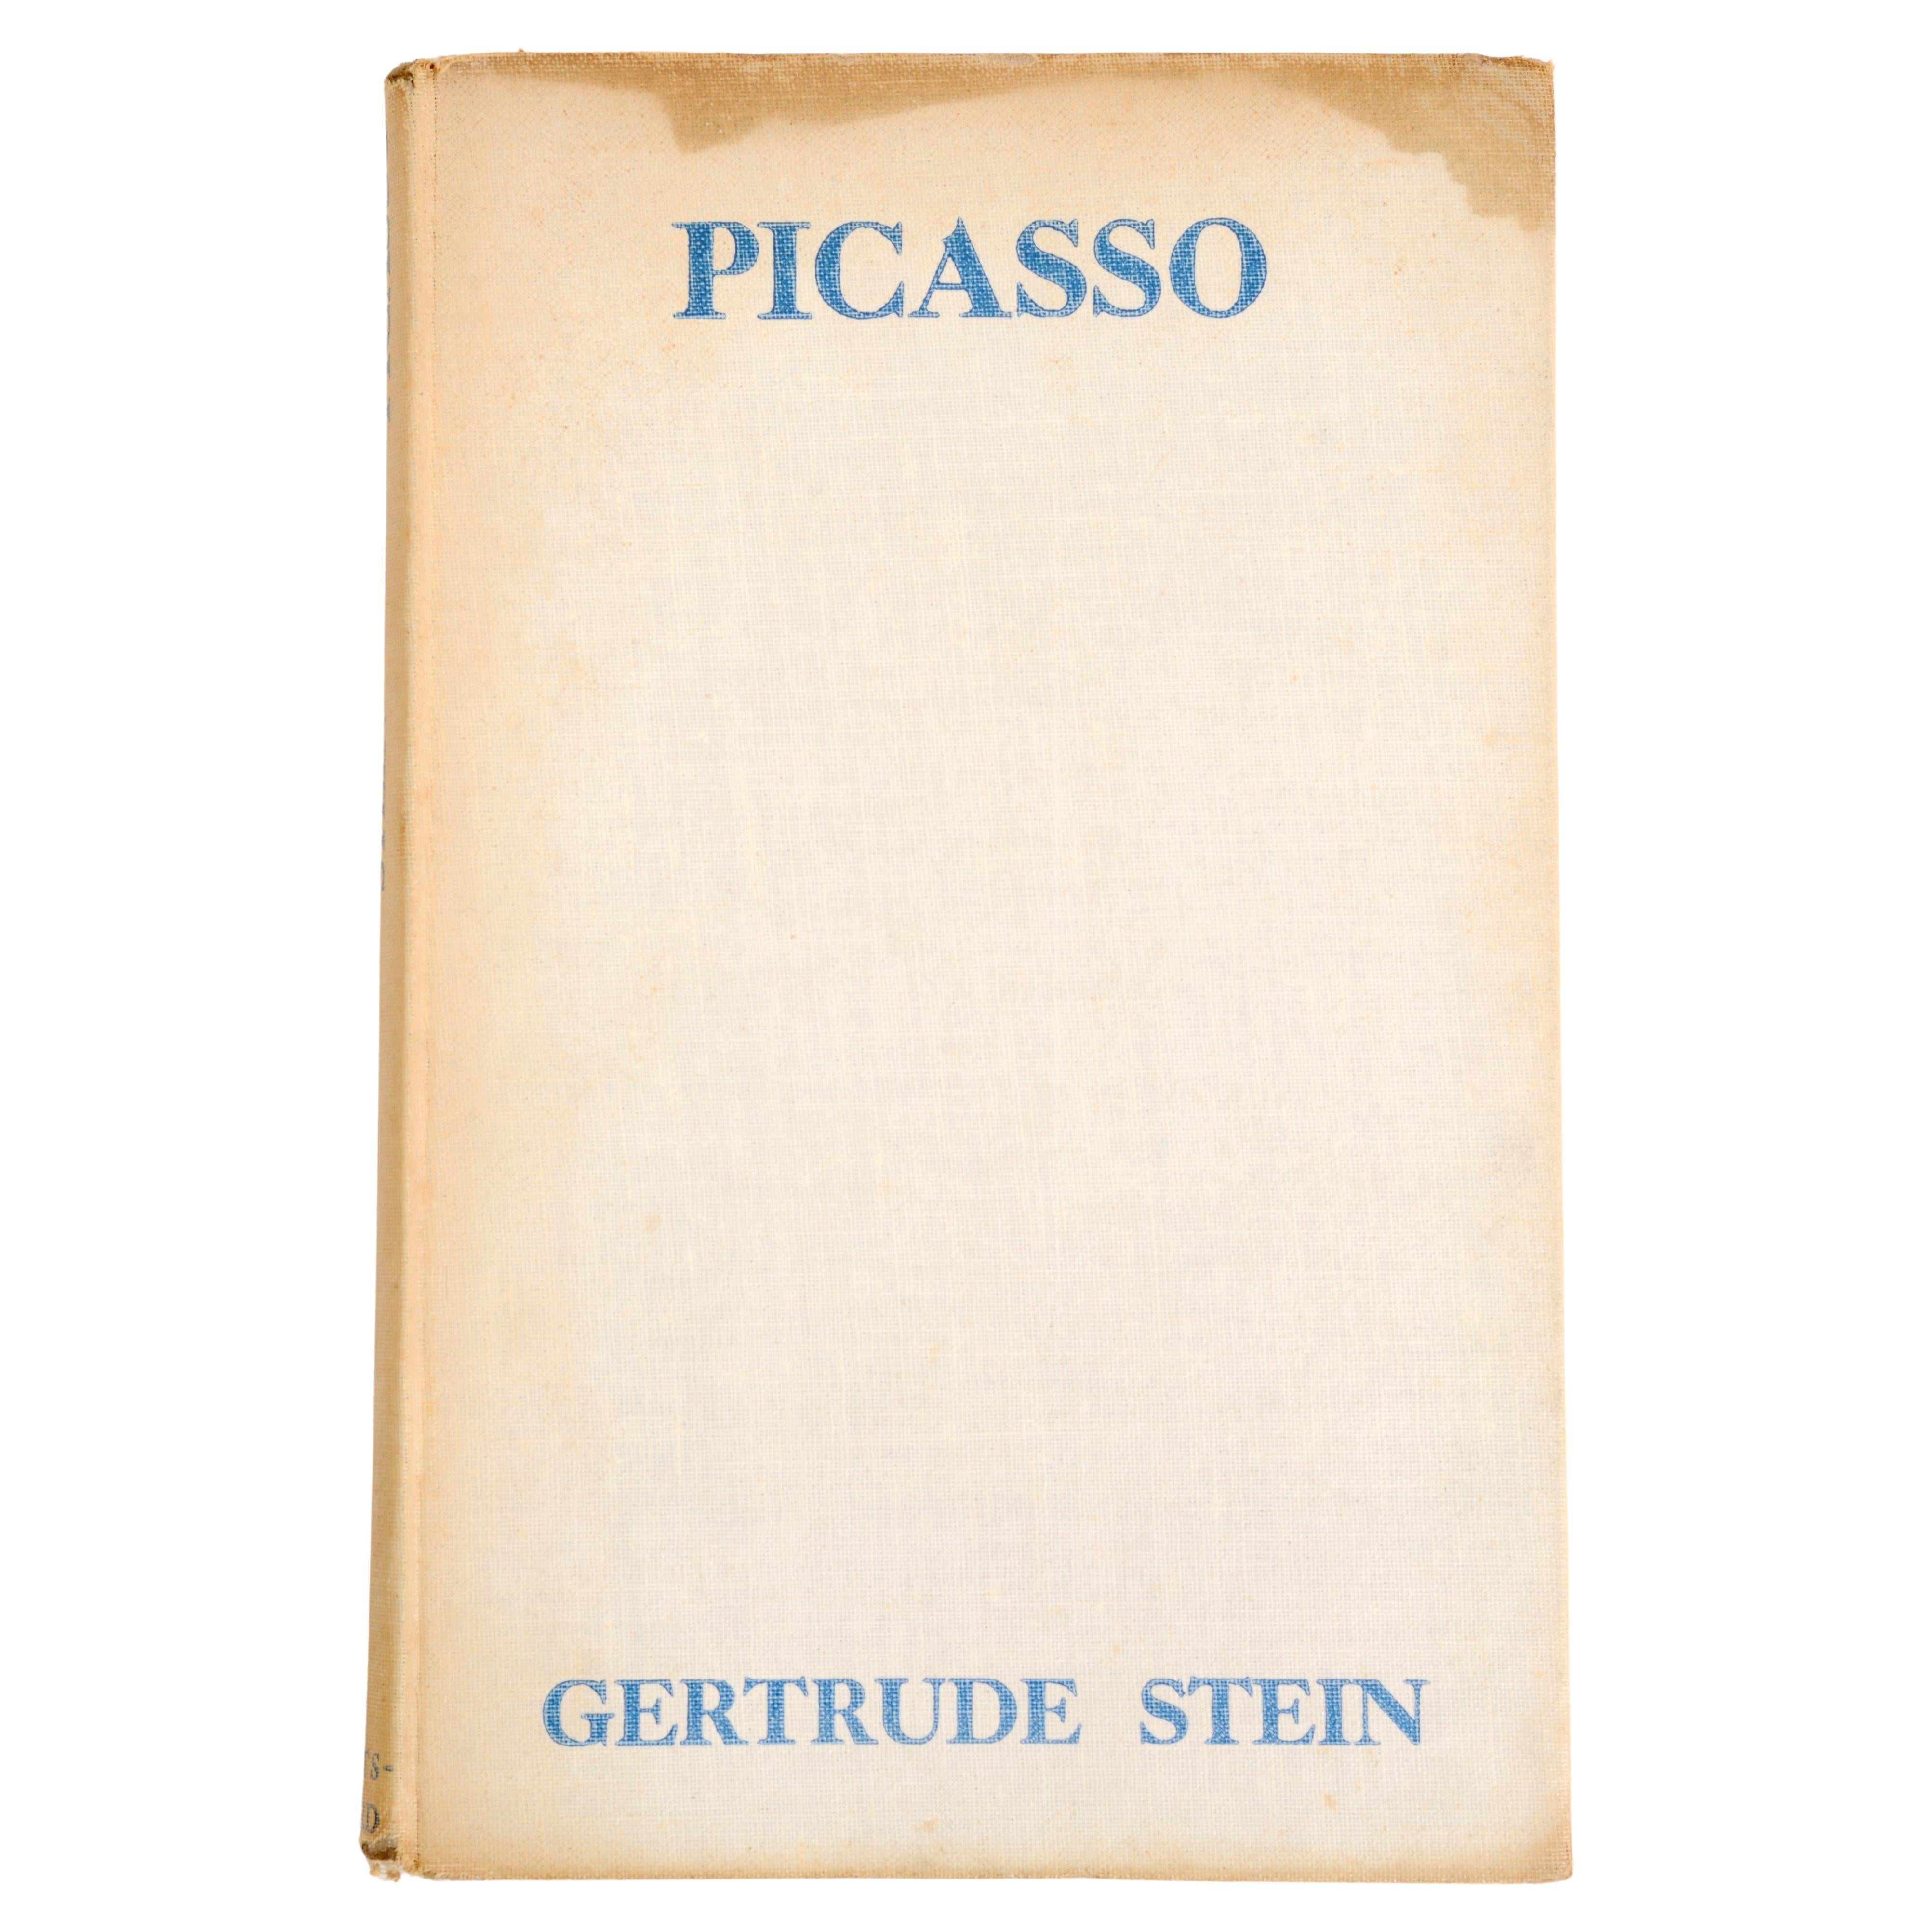 Picasso by Gertrude Stein For Sale